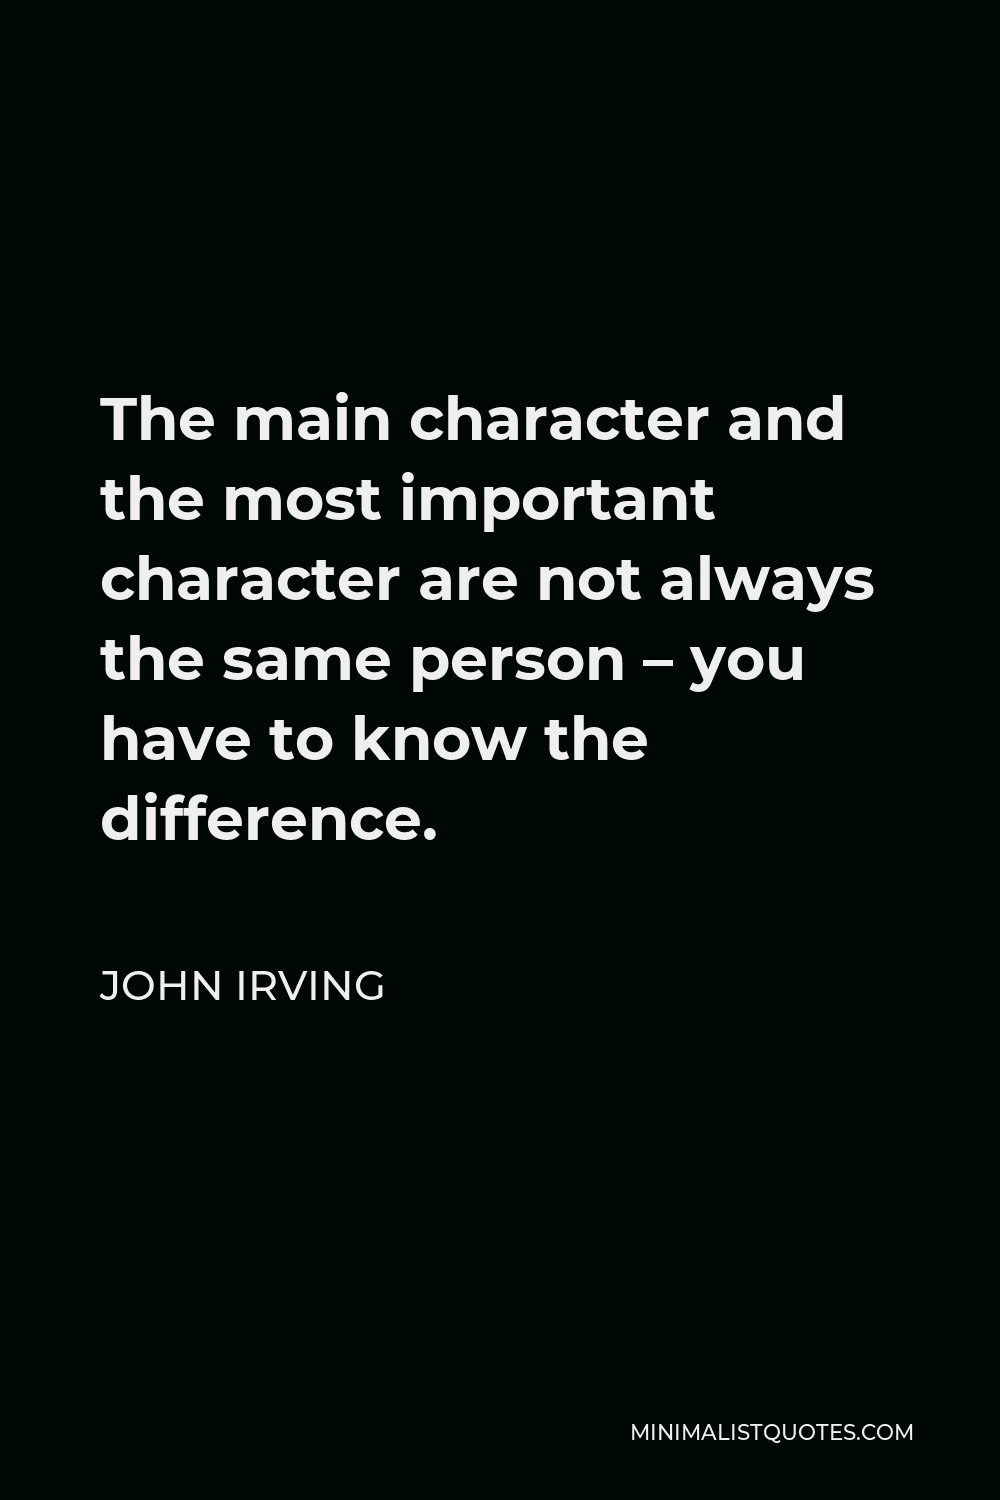 John Irving Quote - The main character and the most important character are not always the same person – you have to know the difference.